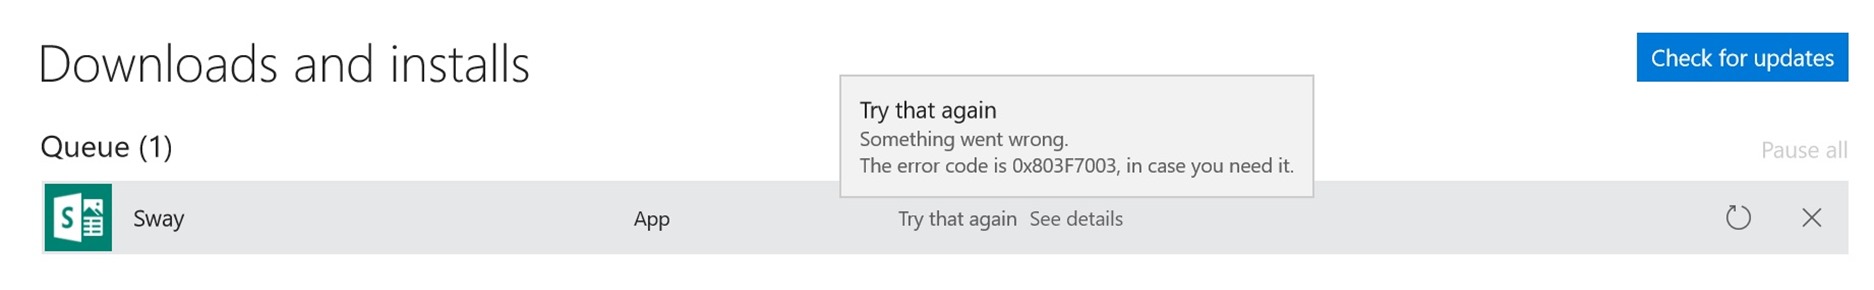 Windows 10 Store - Try that again. Something went wrong. The error code is 0x803F7003, in case you need it.